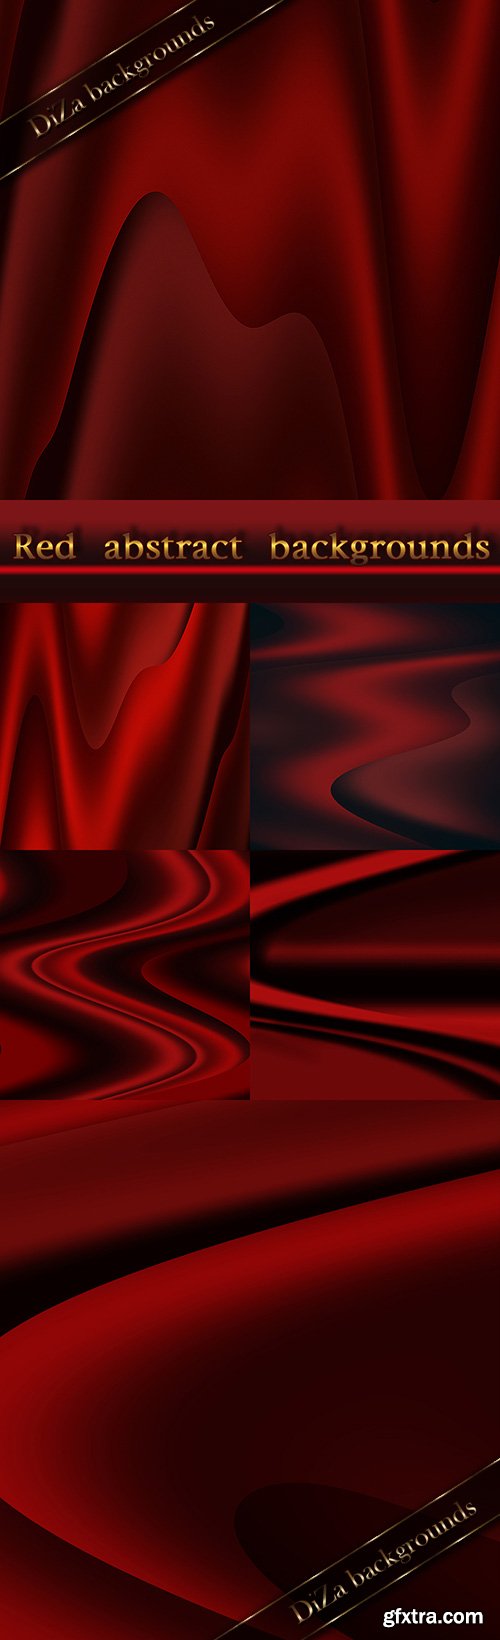 Red abstract backgrounds